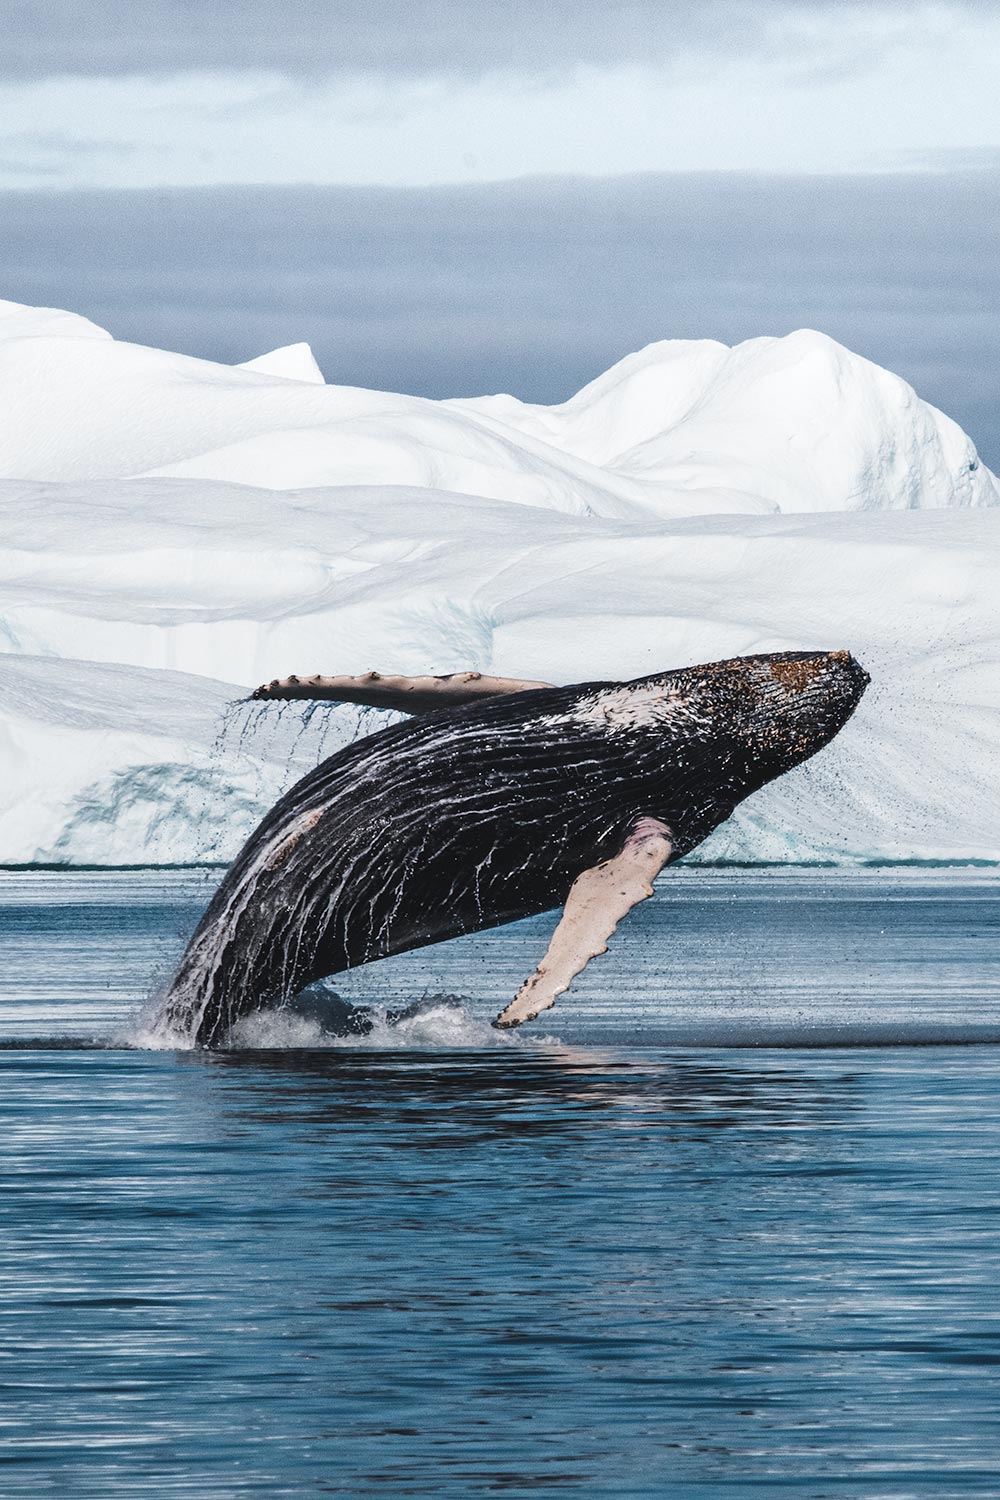 Ilulissat's whale sightings: Marvelous encounters during a 10-day Greenland vacation